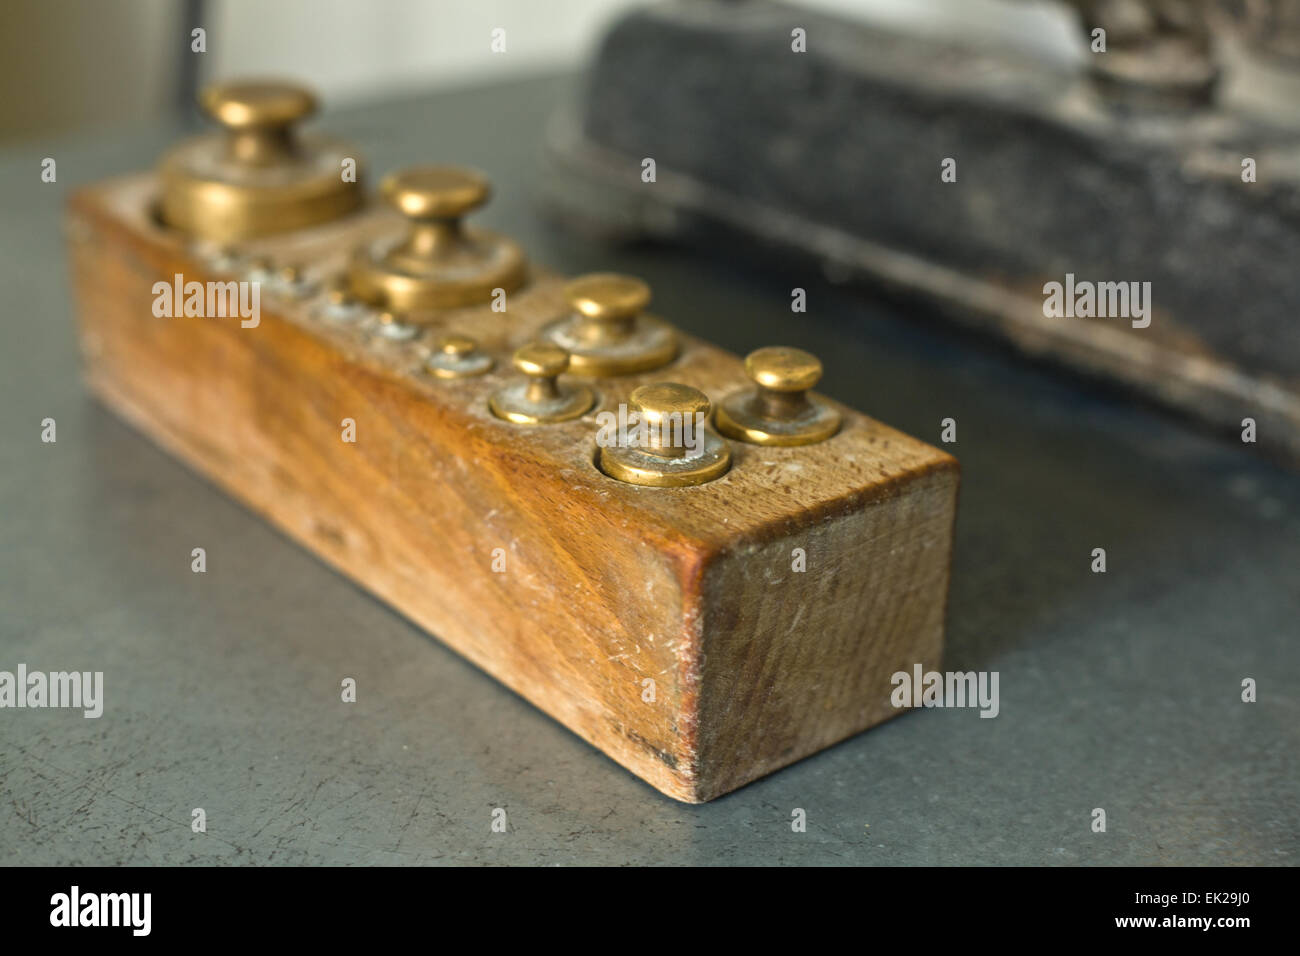 Old vintage brass weights for weighing dough in a bakery in a wooden box Stock Photo